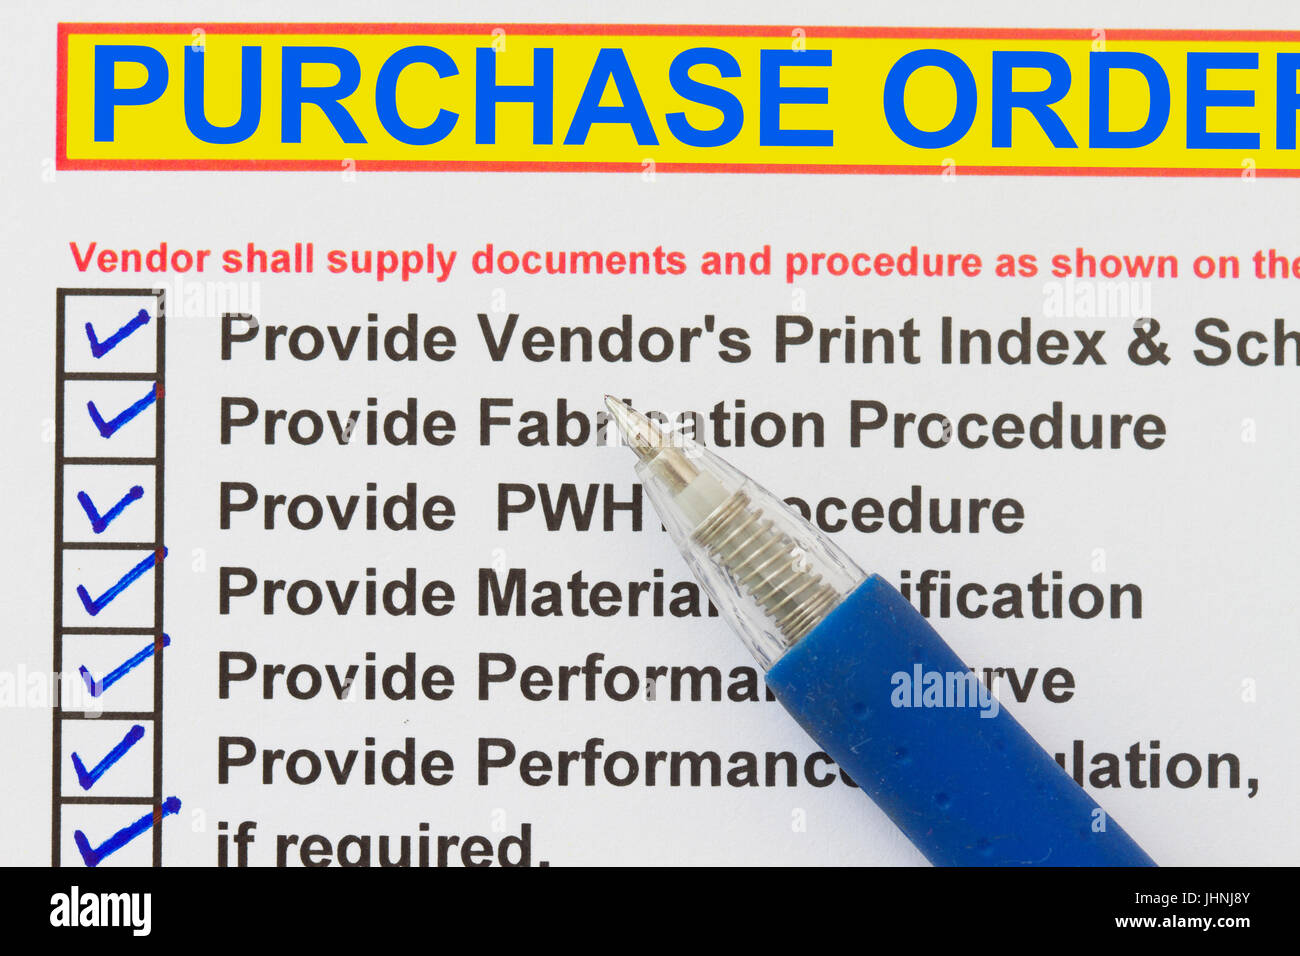 Purchase order requirement document  checklist- many uses in the oil and gas industry. Stock Photo